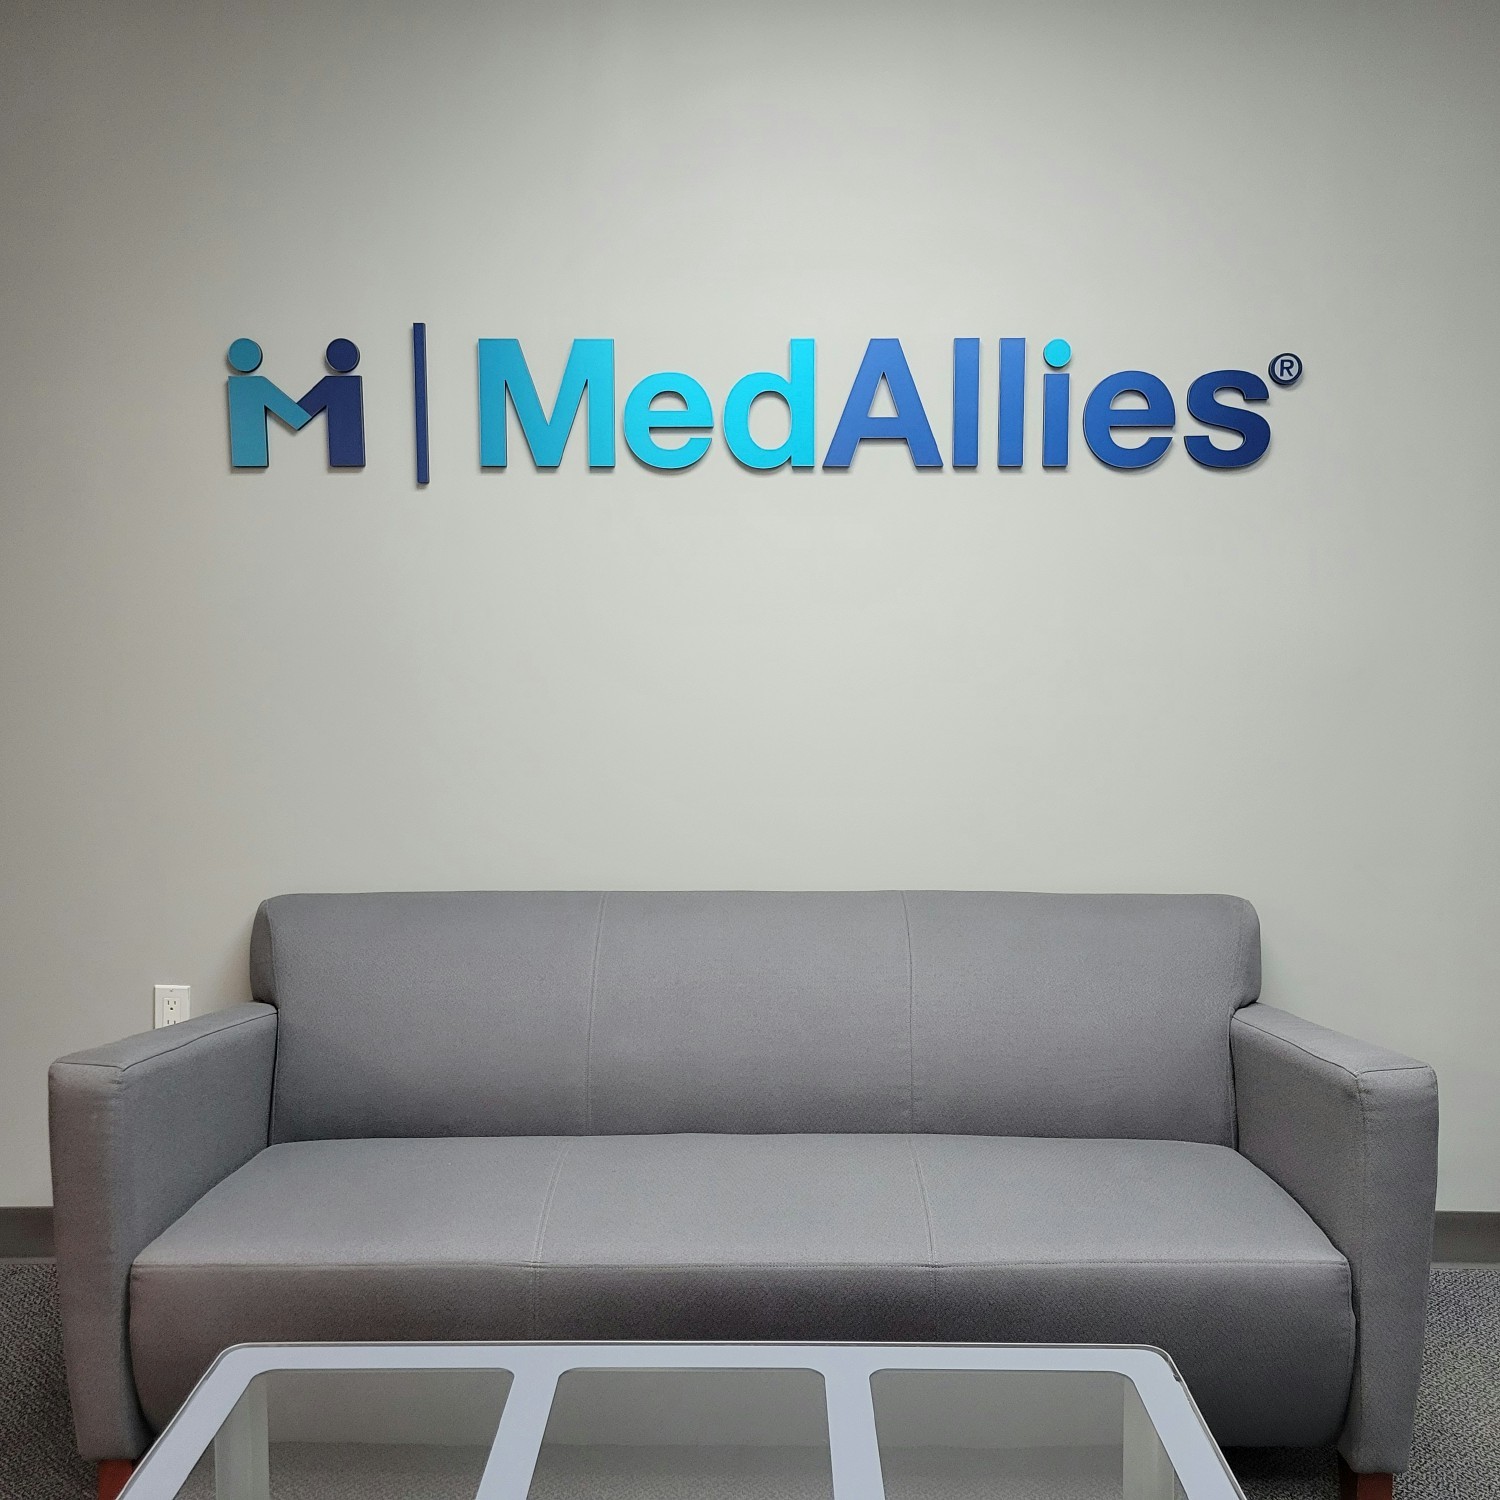 Welcome to MedAllies!